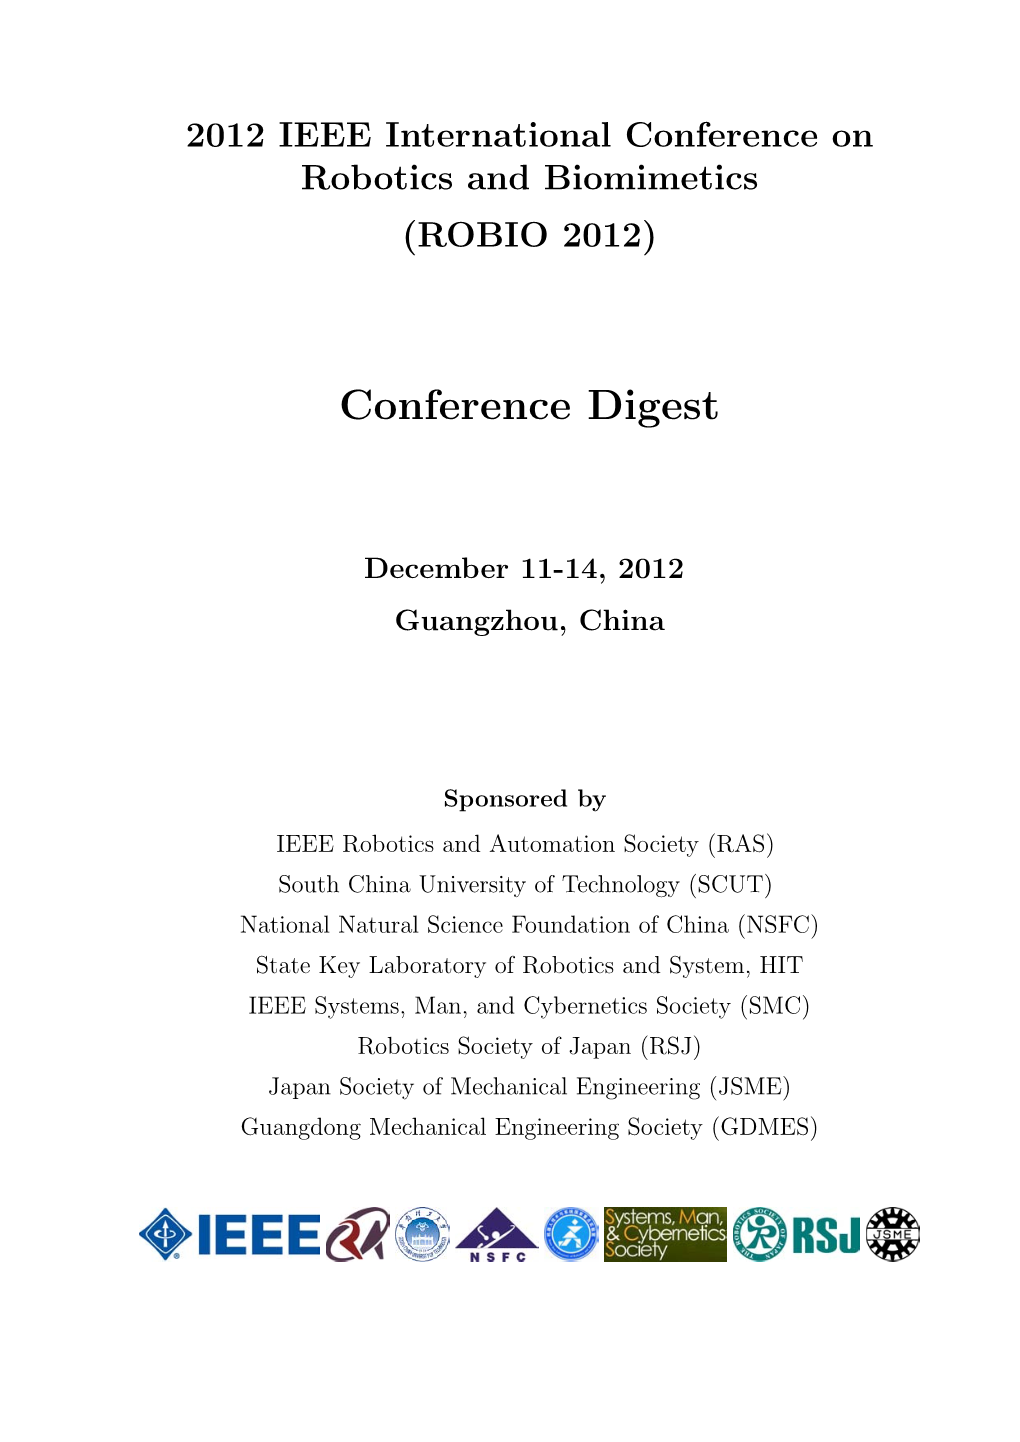 Conference Digest